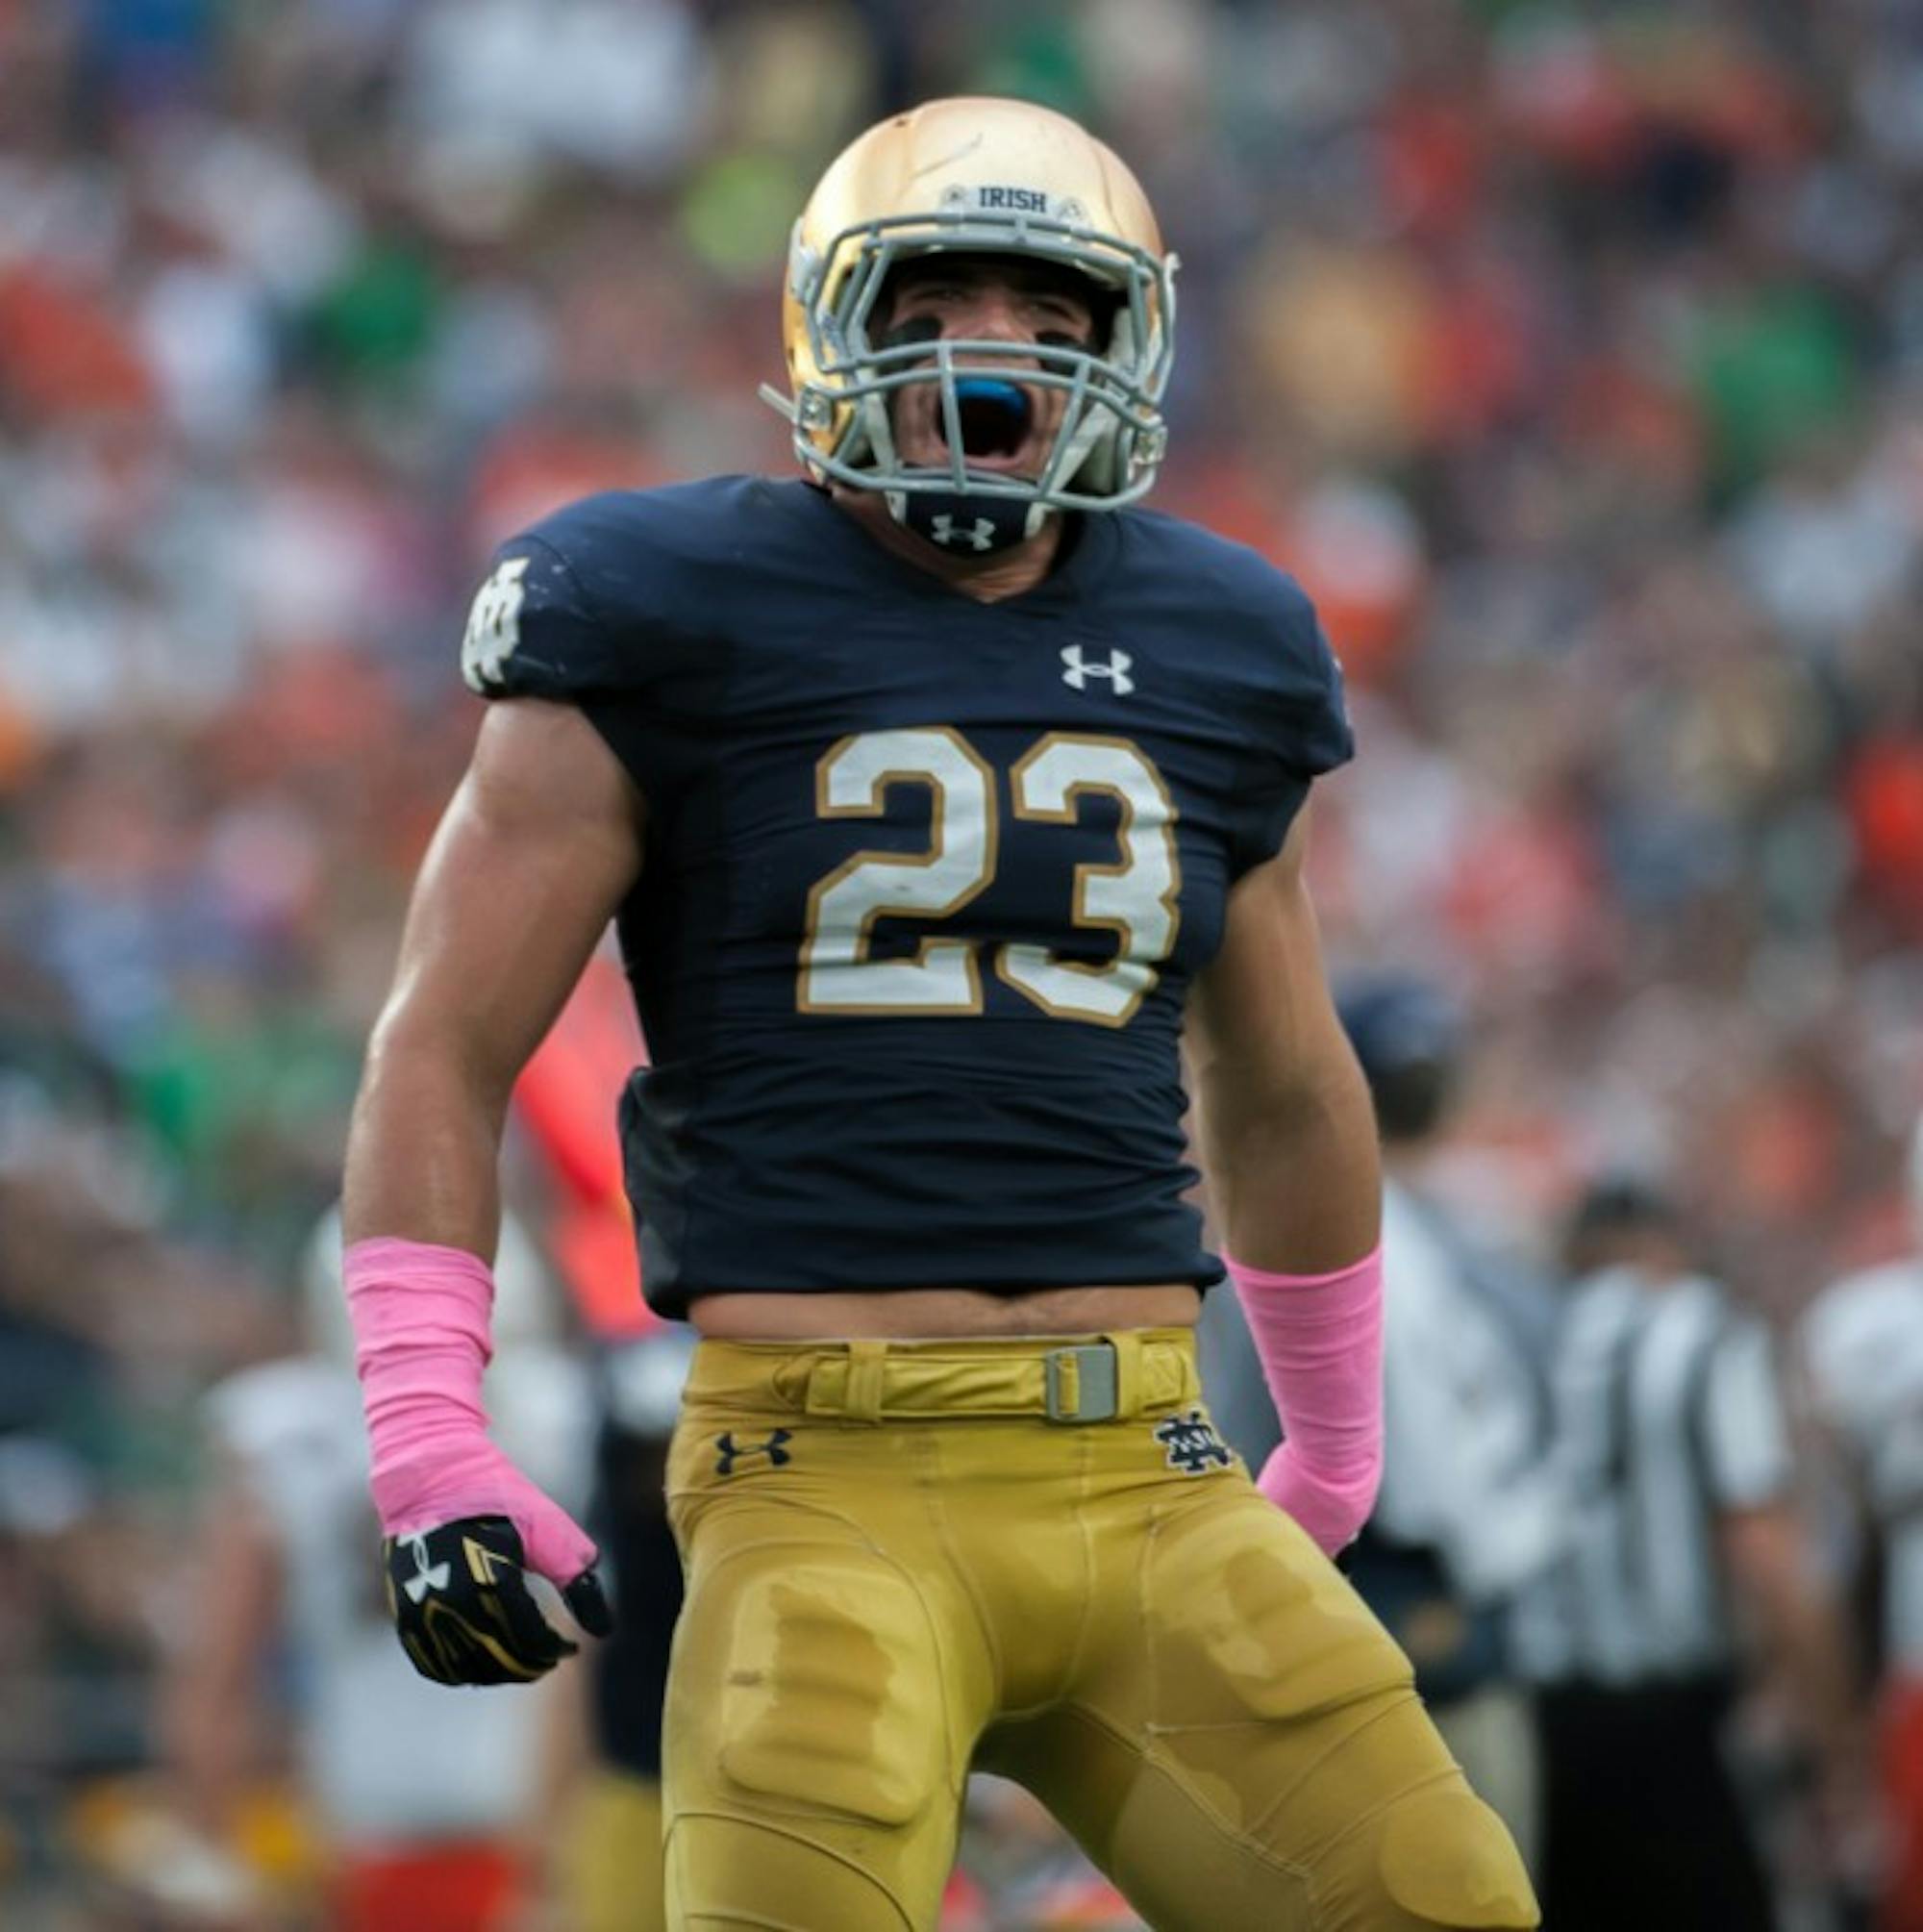 Senior Drue Tranquill celebrates after a defensive stop during Notre Dame’s victory over the Hurricanes on Oct. 29, 2016.